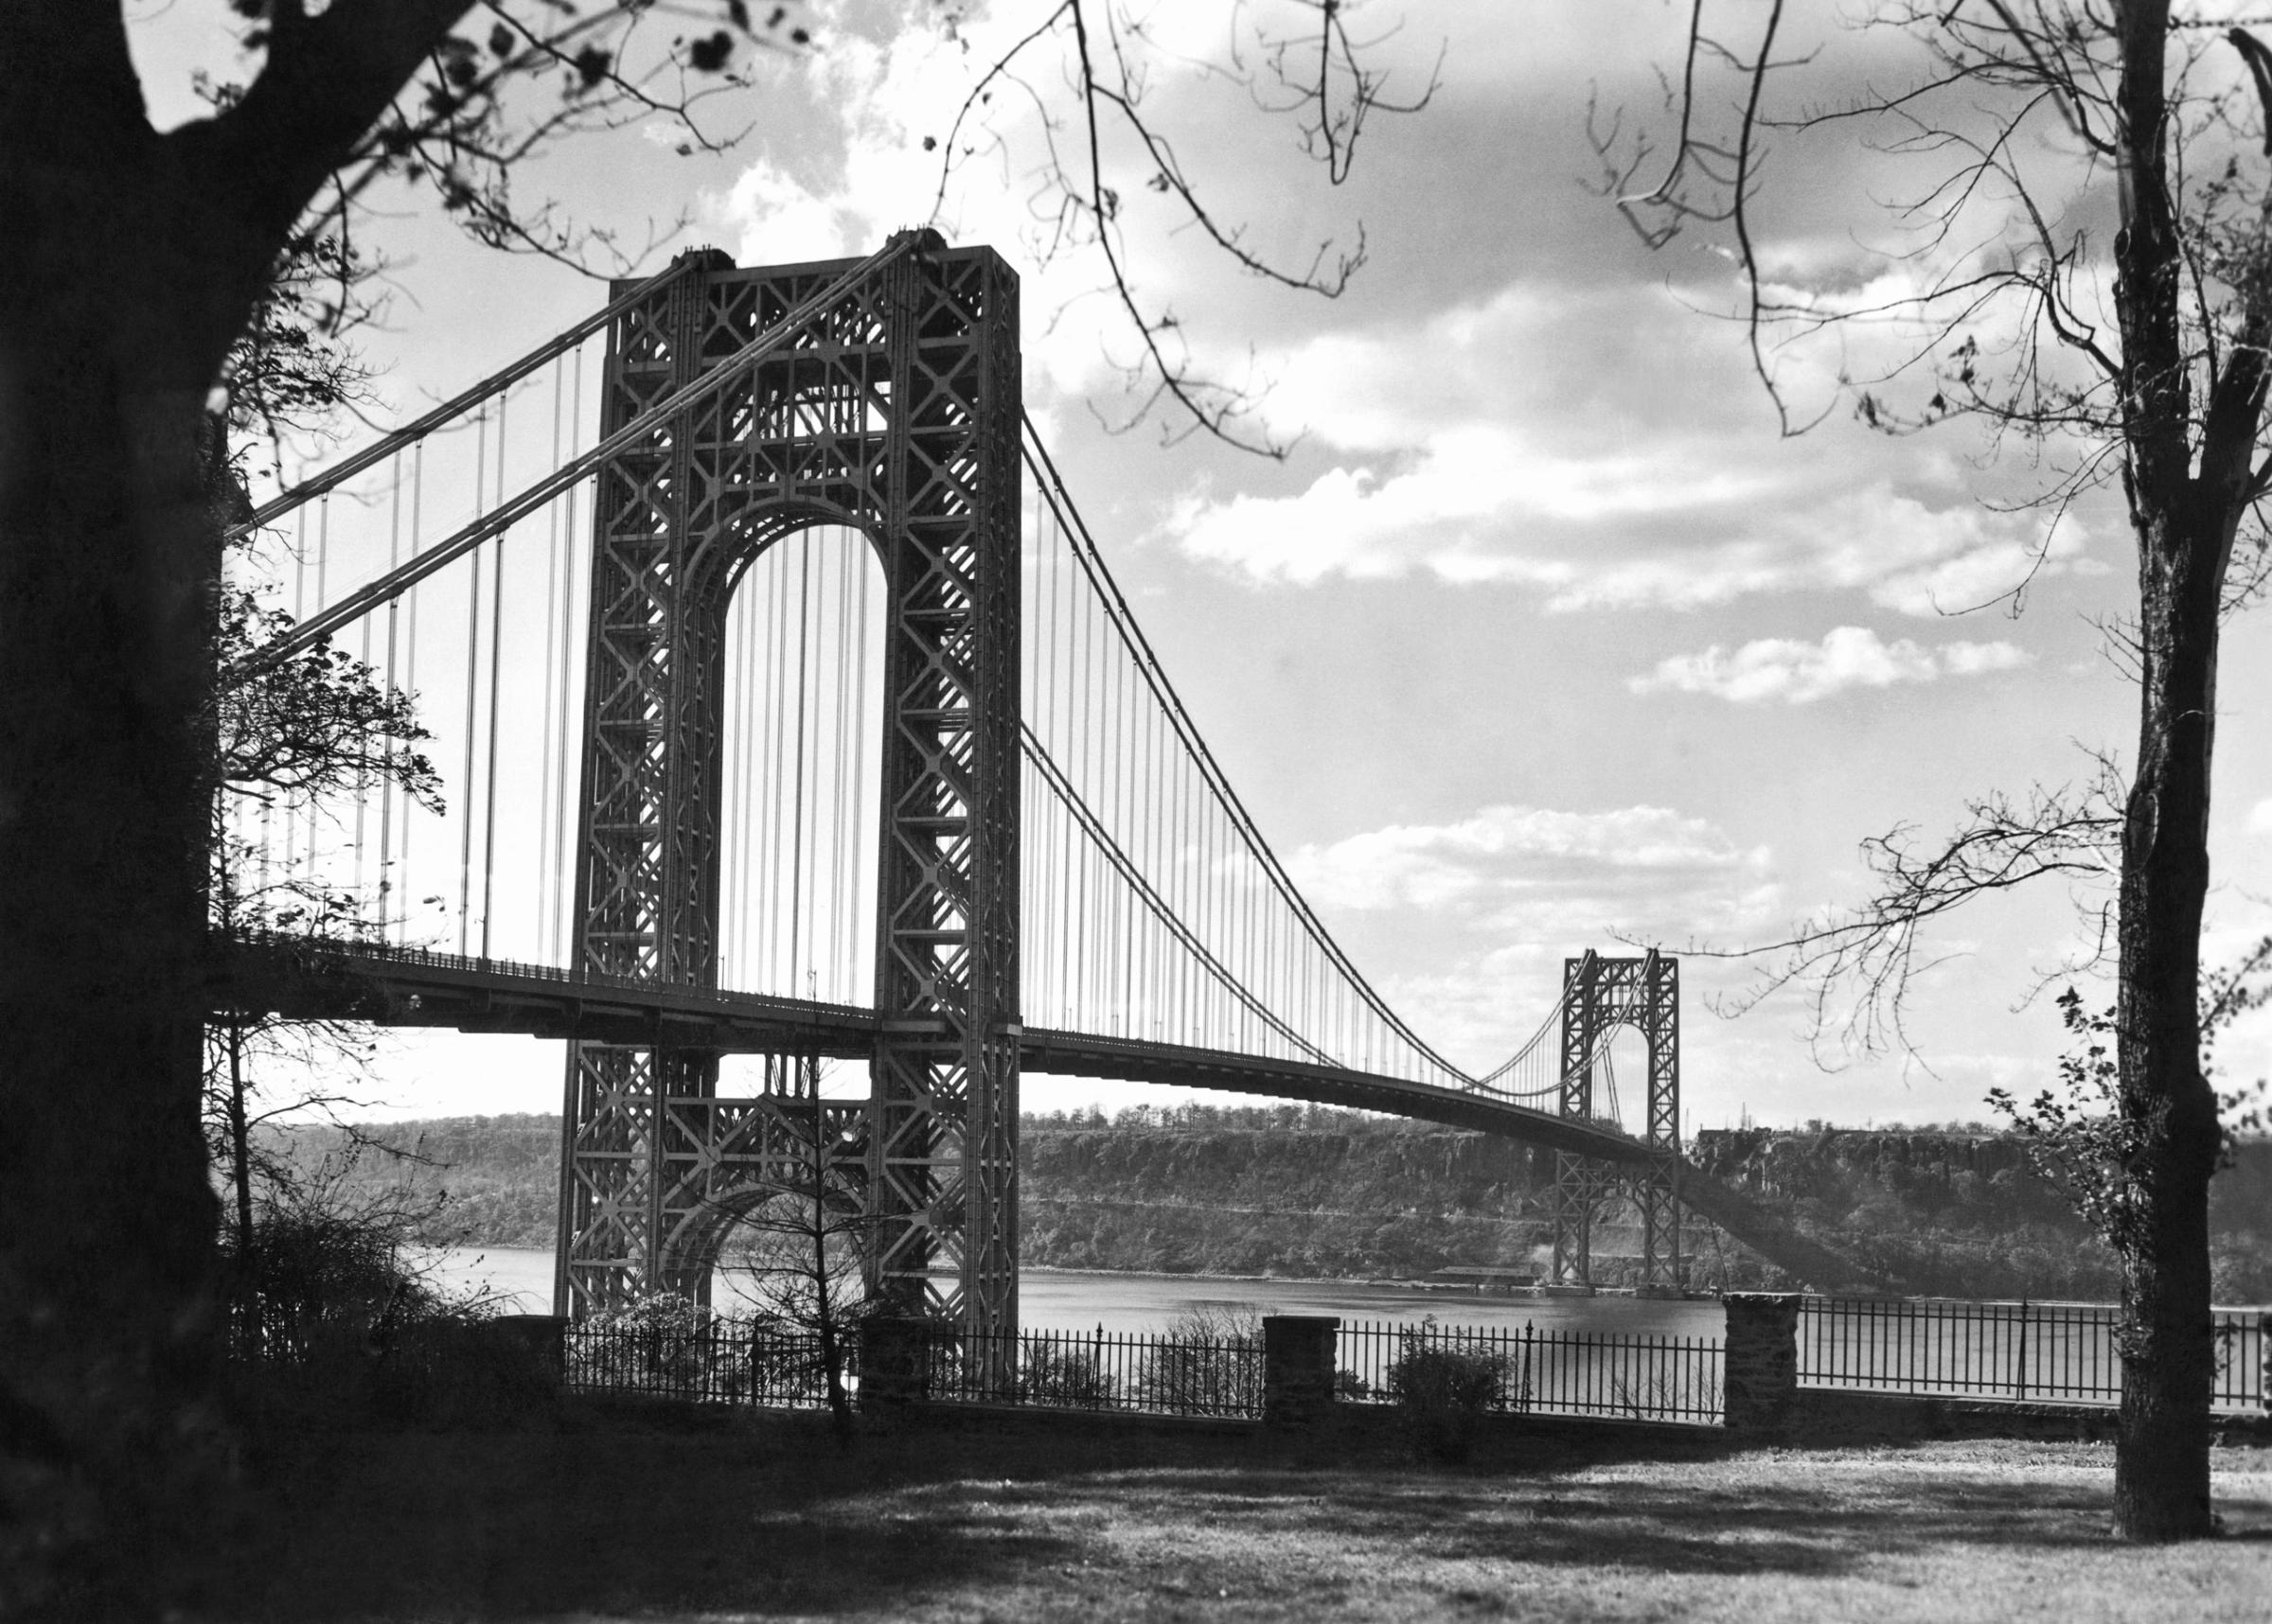 View of the George Washington Bridge from Washington Heights in Manhattan across to Fort Lee in New Jersey, New York, New York, 1932.